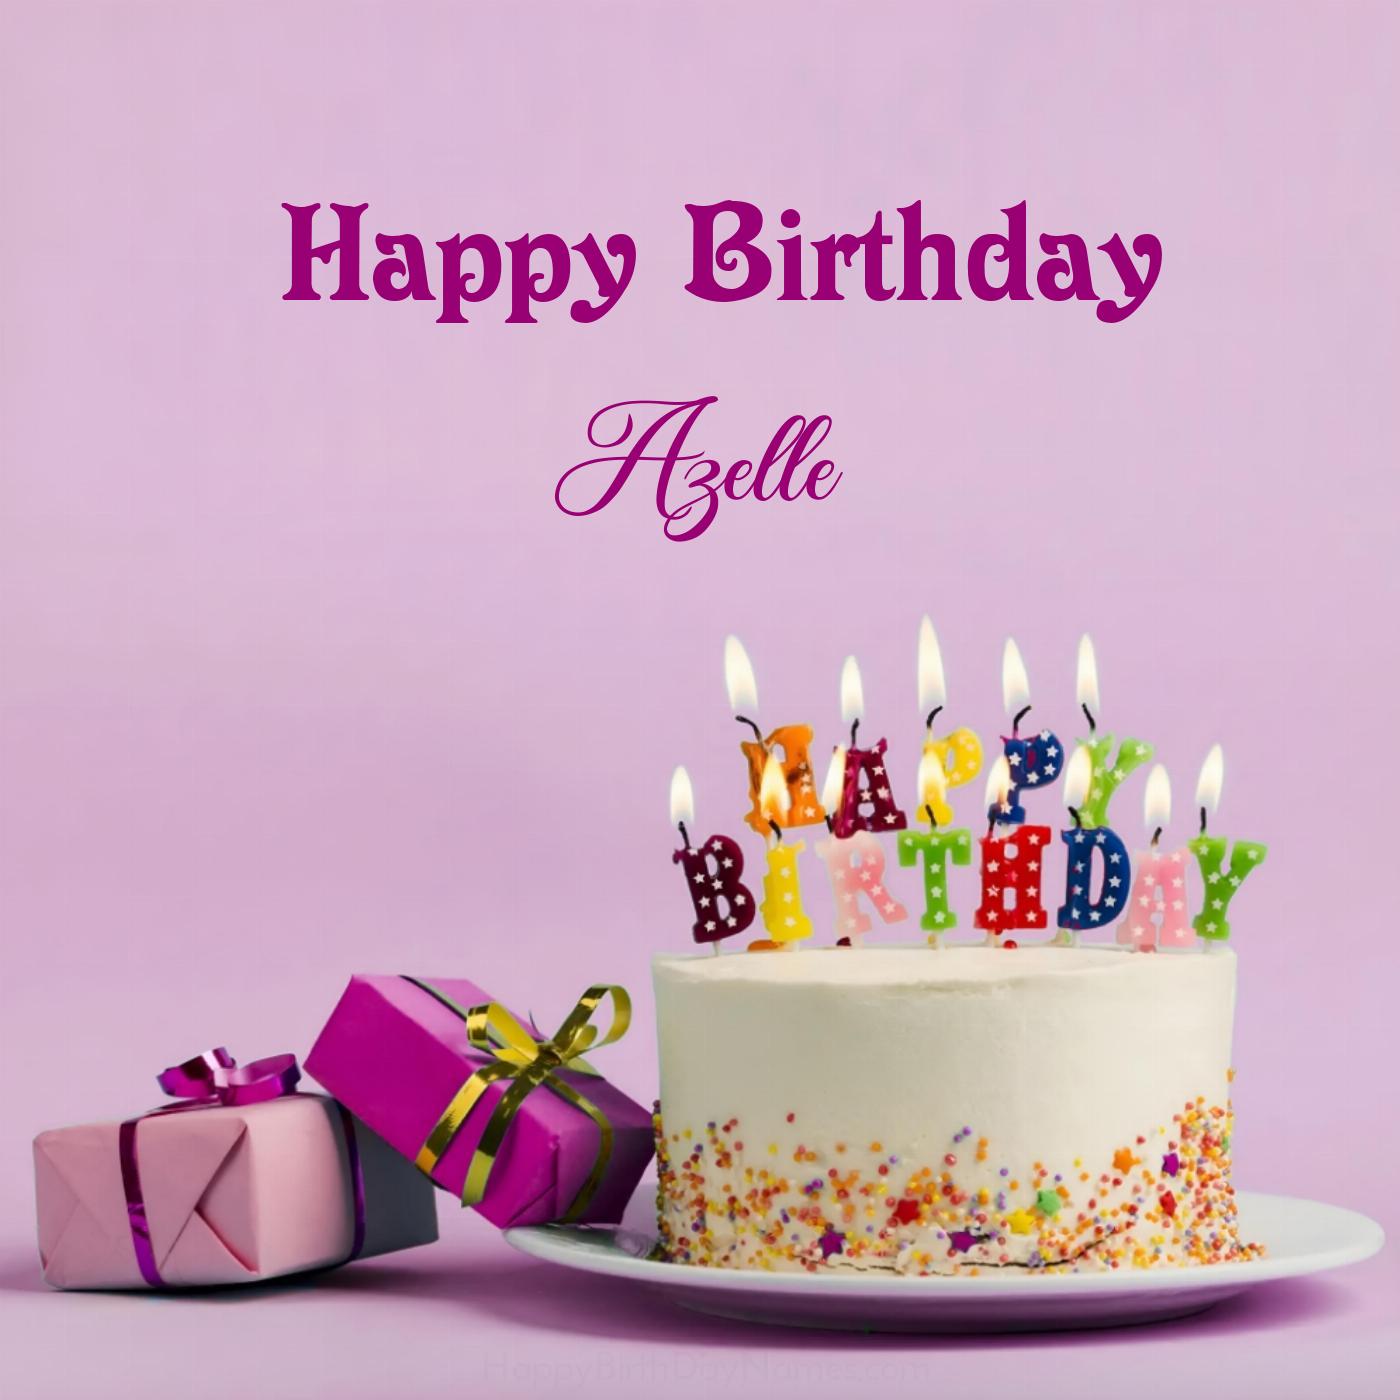 Happy Birthday Azelle Cake Gifts Card